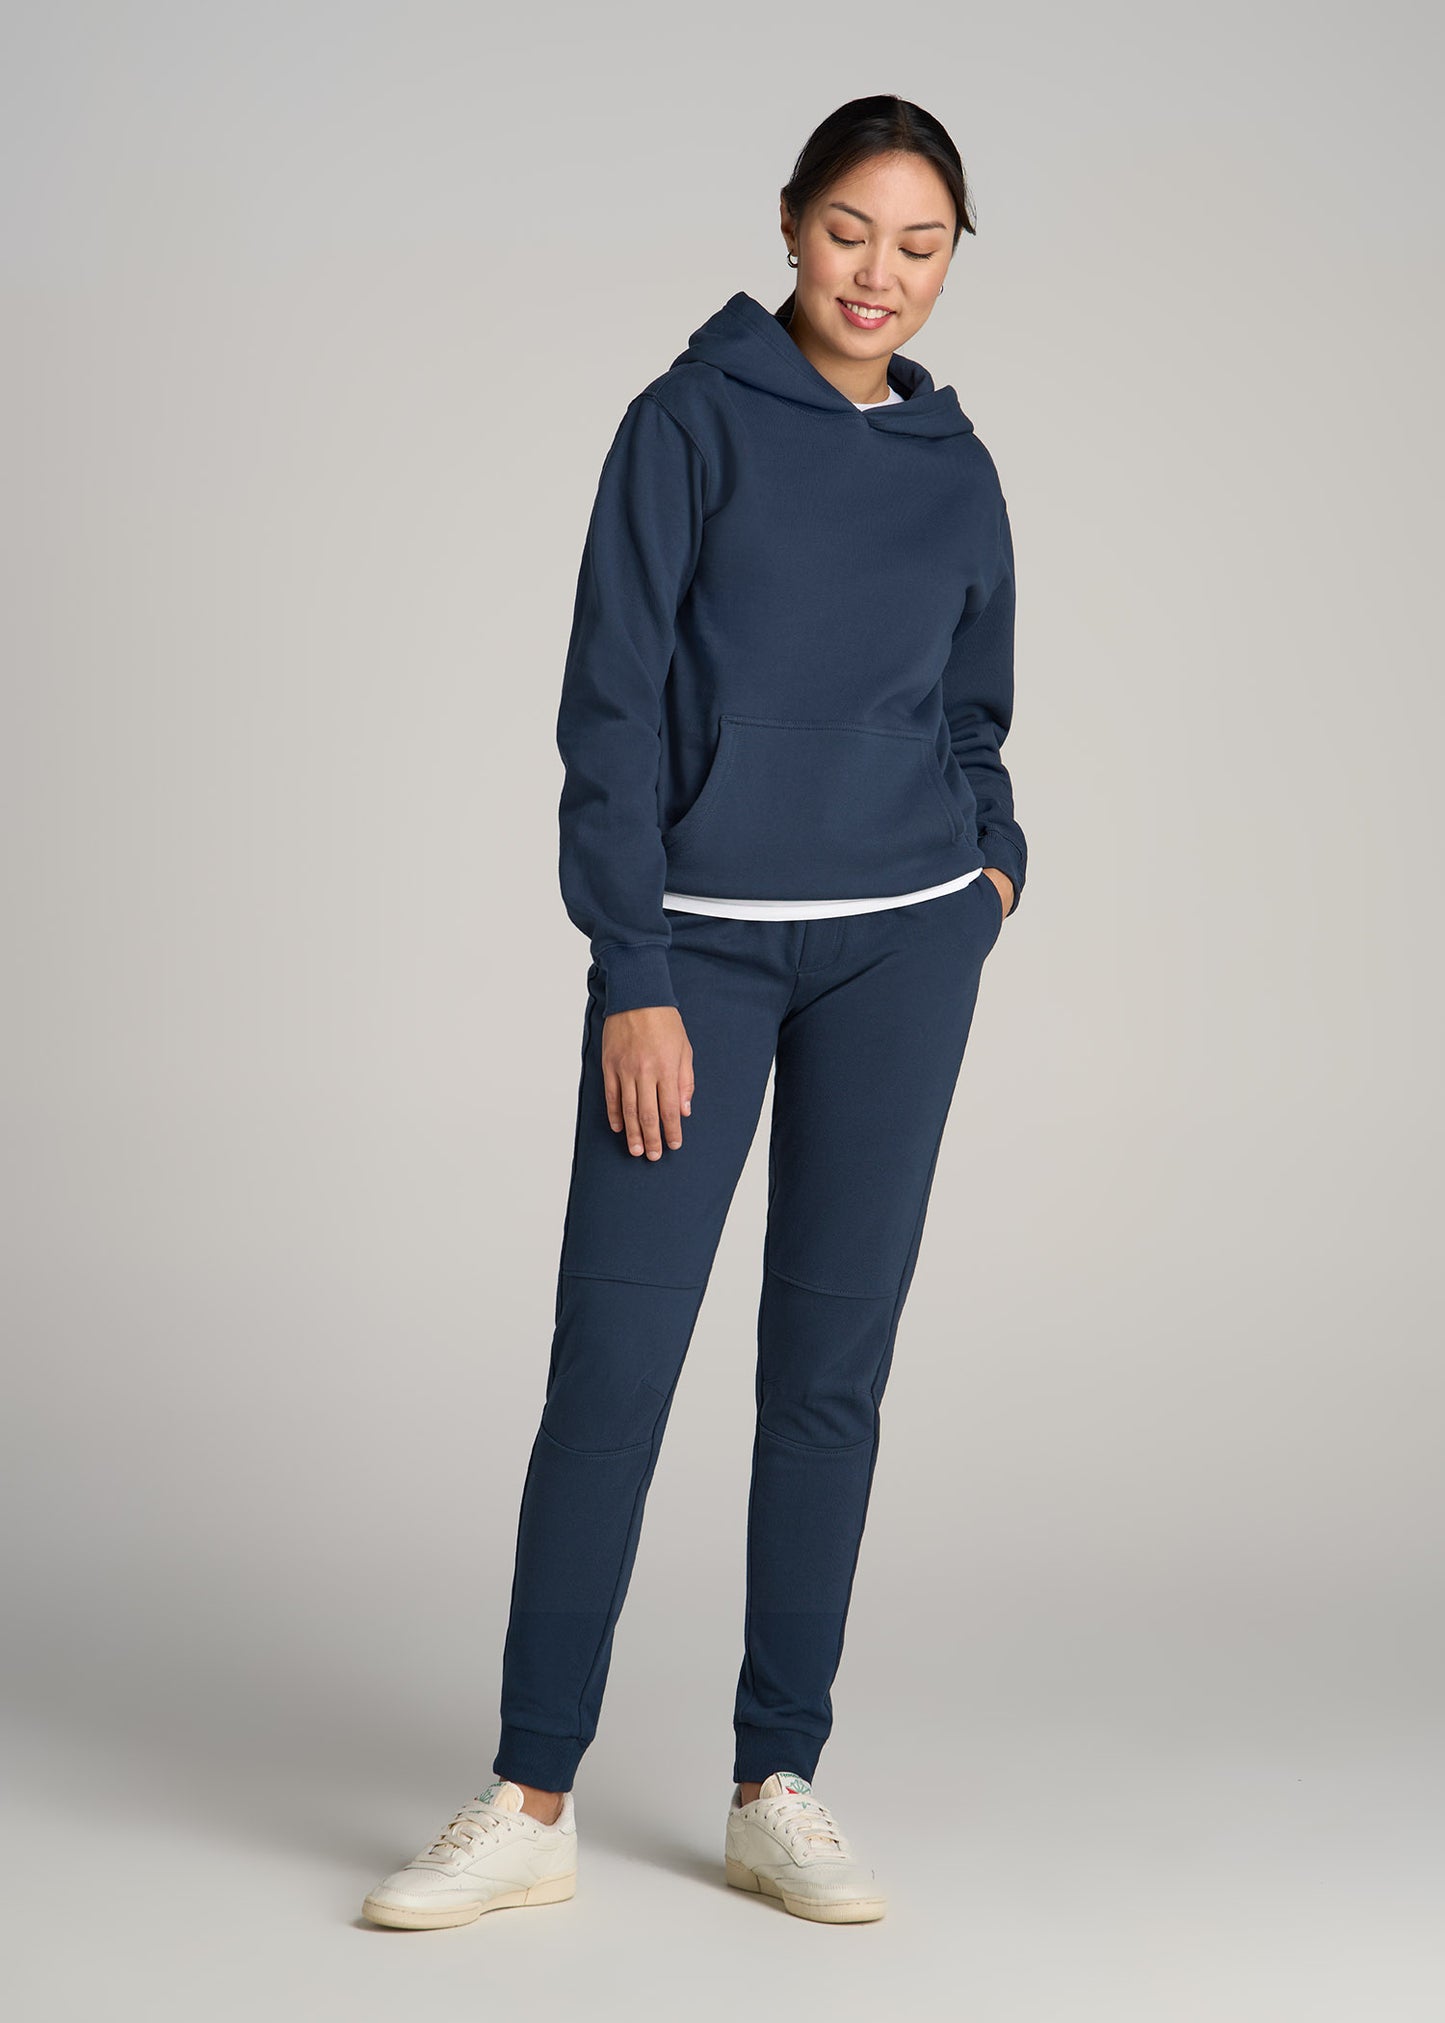 Wearever French Terry Tall Women's Joggers in Bright Navy